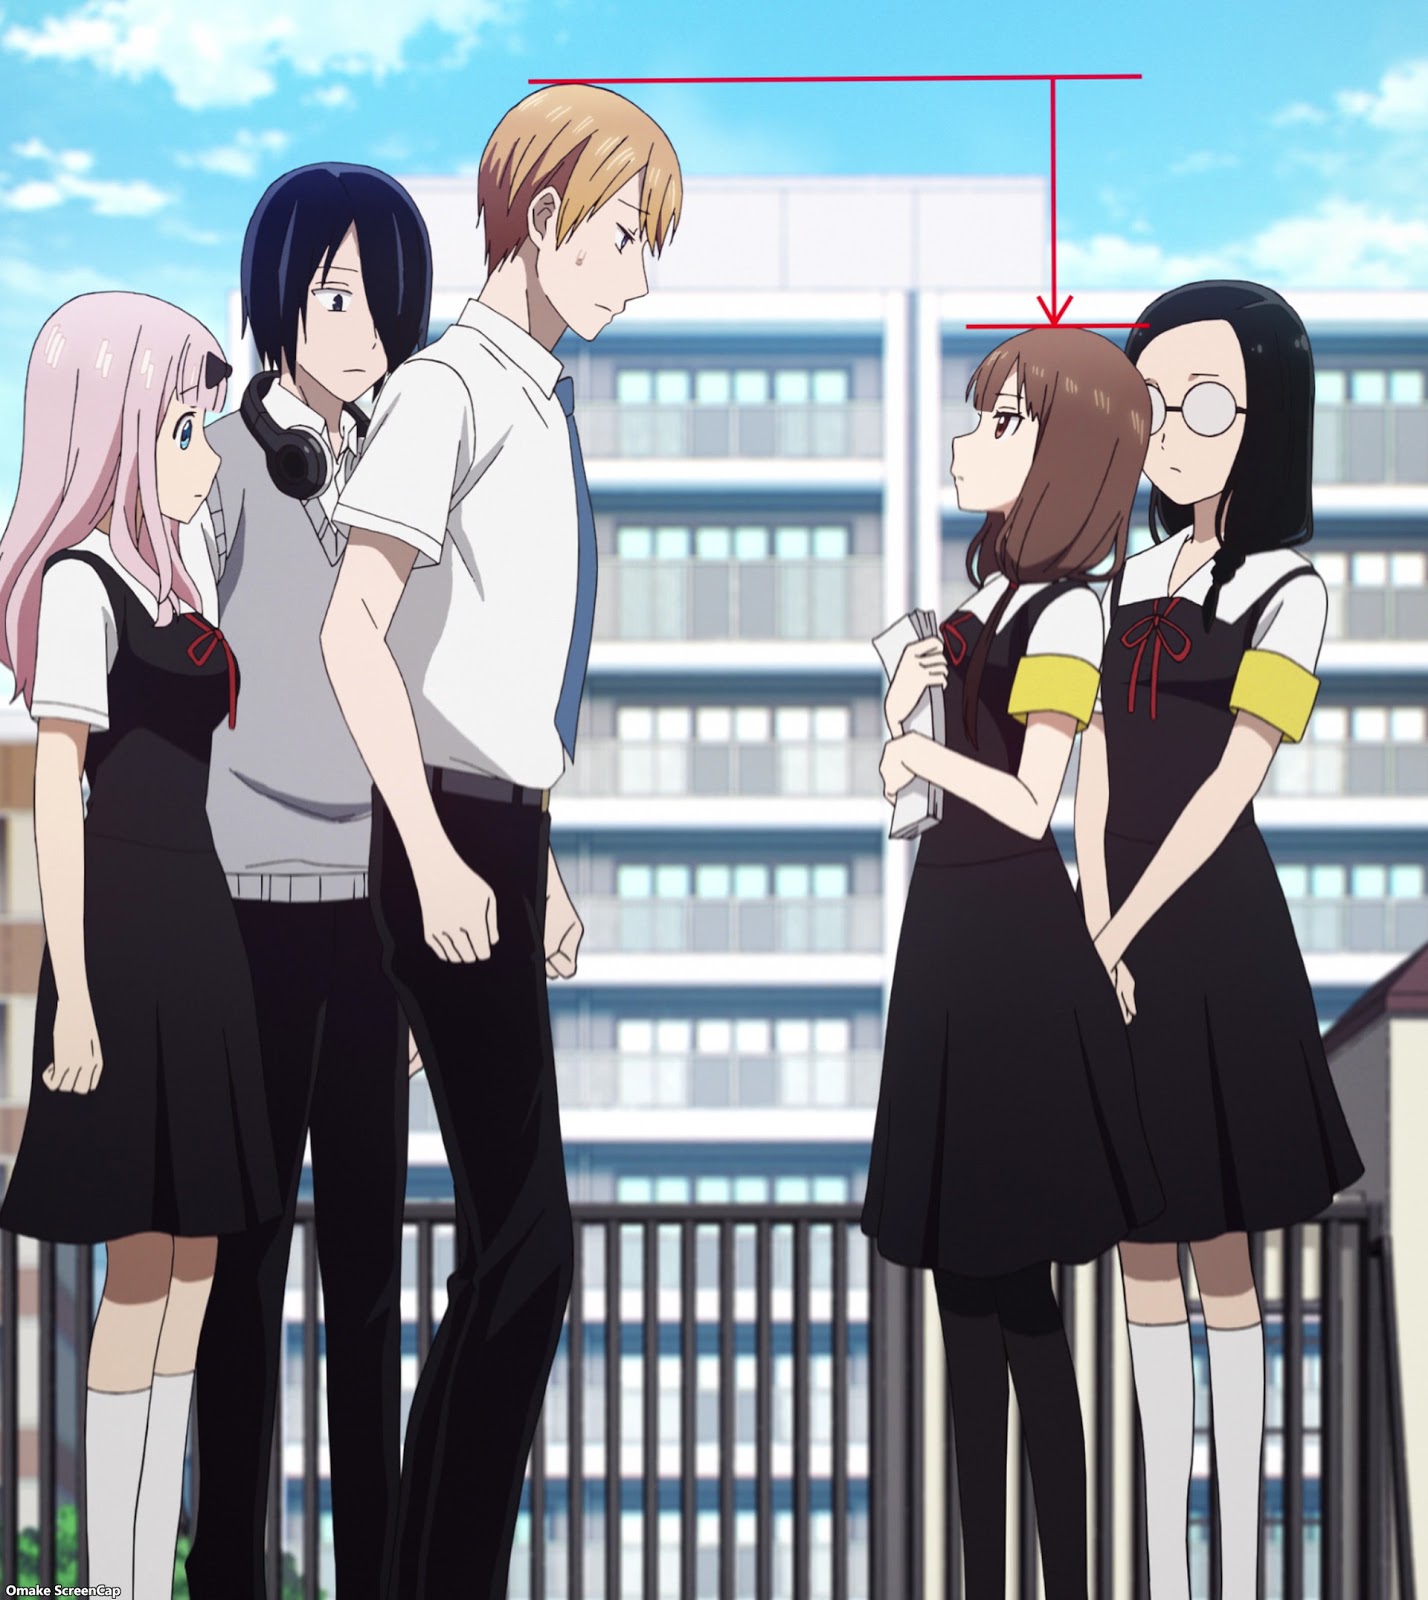 Kaguya-Sama: Love is War Season 2 Episode 4 Impressions - A Bumpy Start to  the Student Elections – OTAQUEST